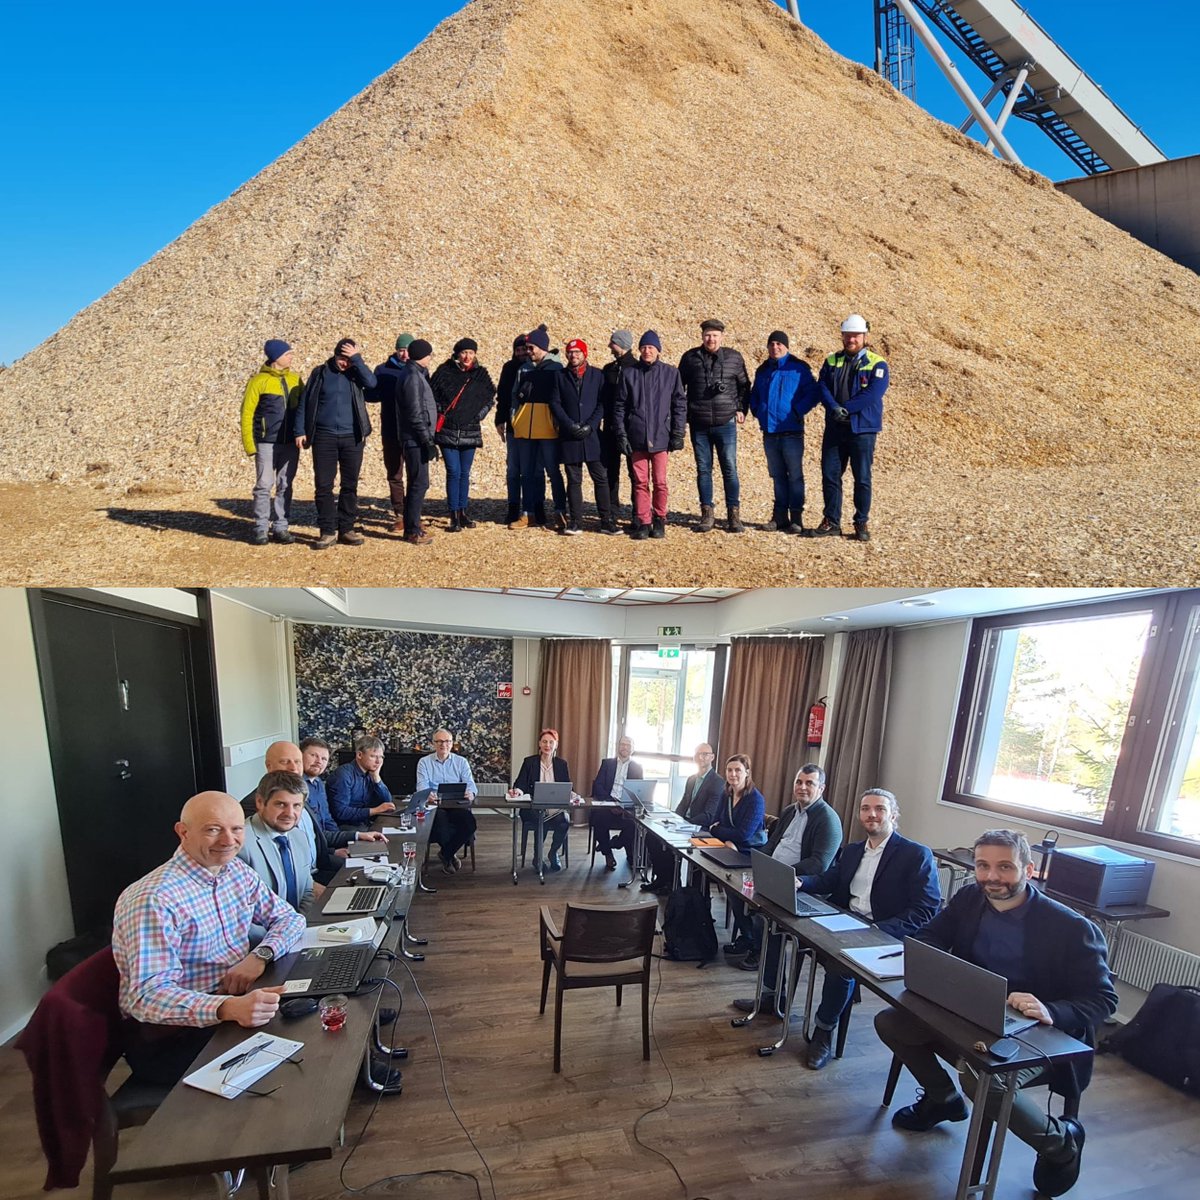 🇫🇮 Today the @bioenergyEU Board visited @NeveOy Suosiola Combined #heat and Power Plant in @VisitRovaniemi , #finland. ♻️ Another great example of #circulareconomy